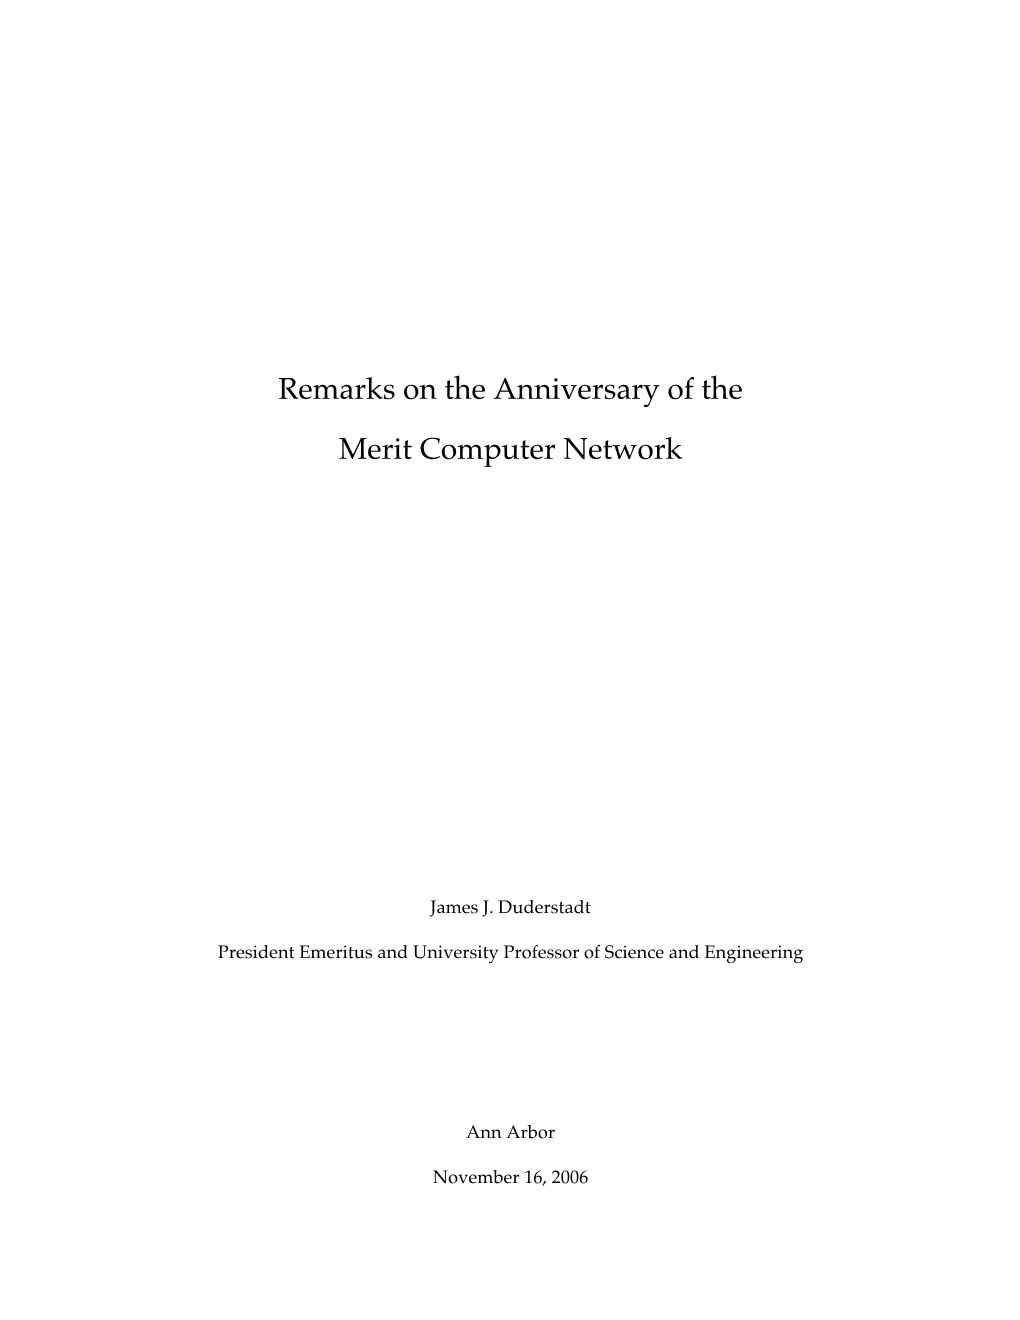 Remarks on the Anniversary of the Merit Computer Network